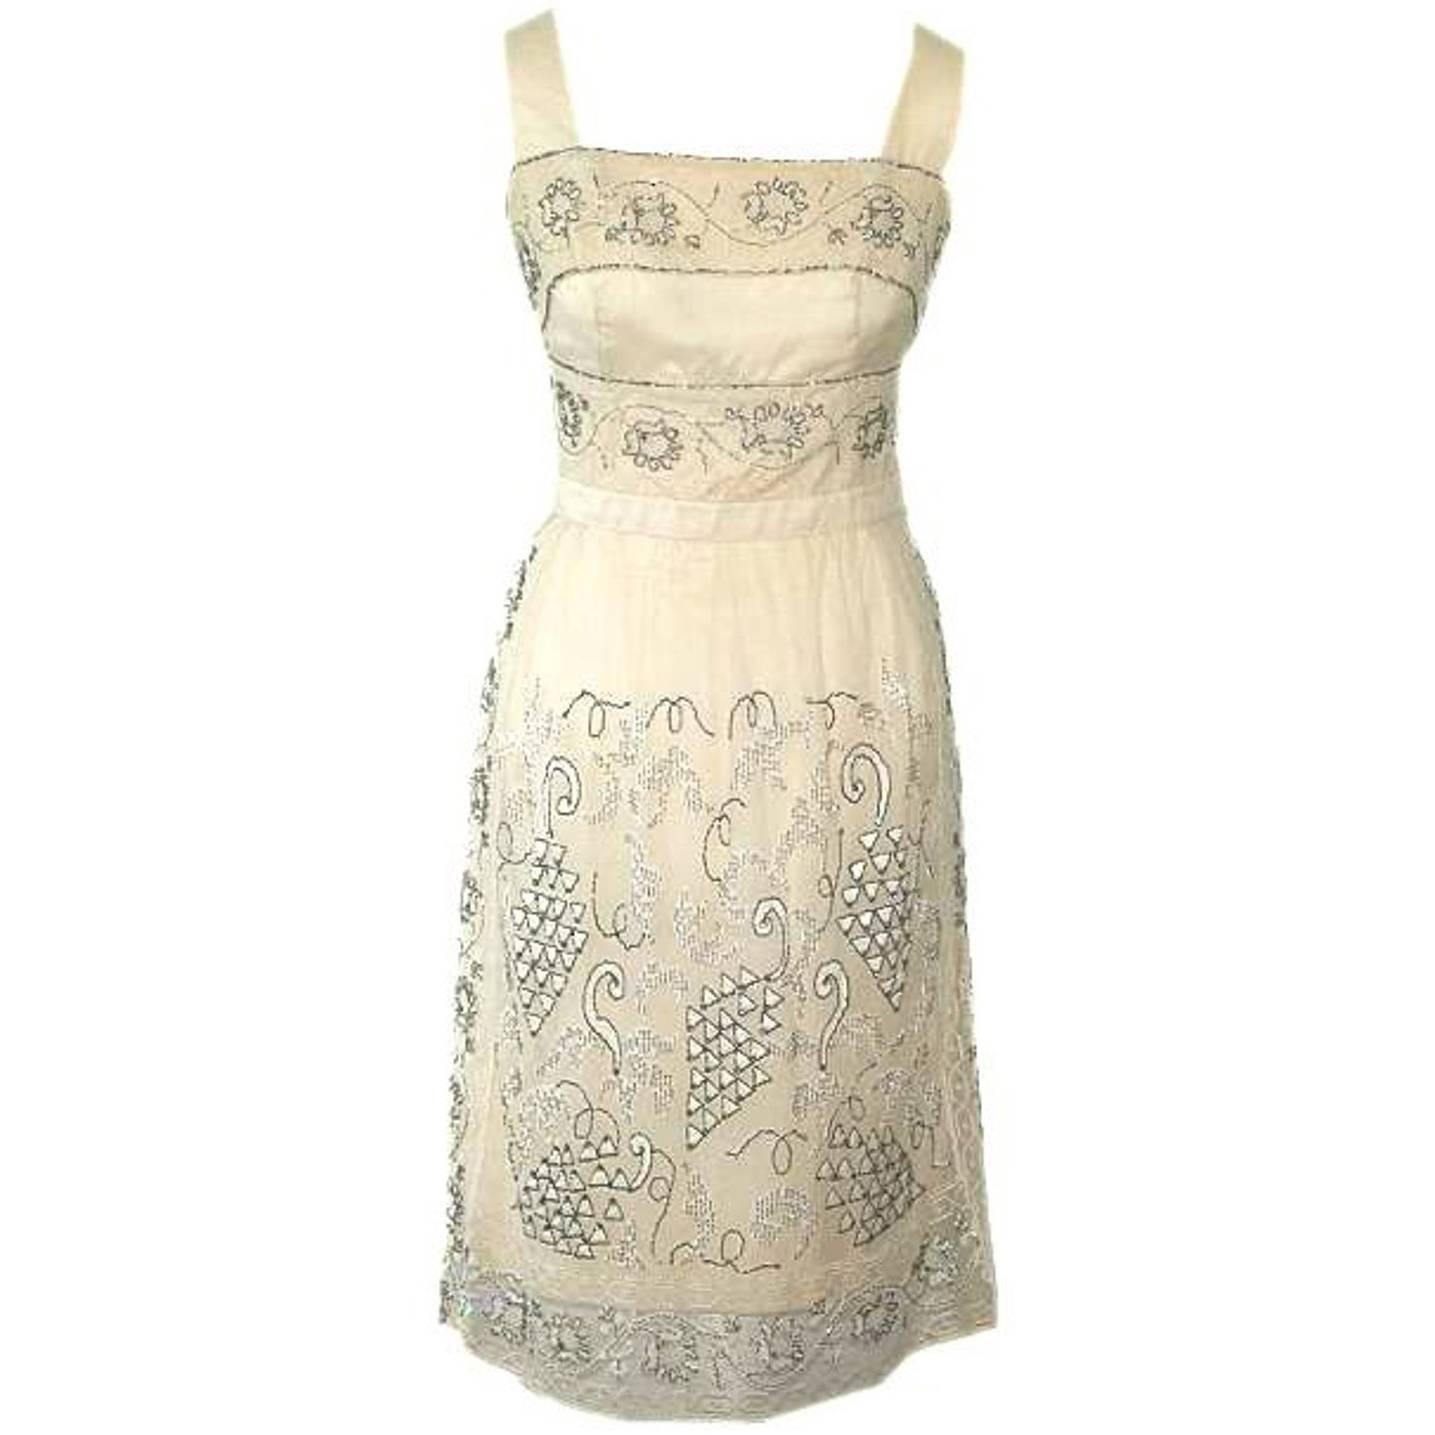 Cream Silk and Hand Made Lace Dress with Beads and Glass Rhinestones circa 1960s